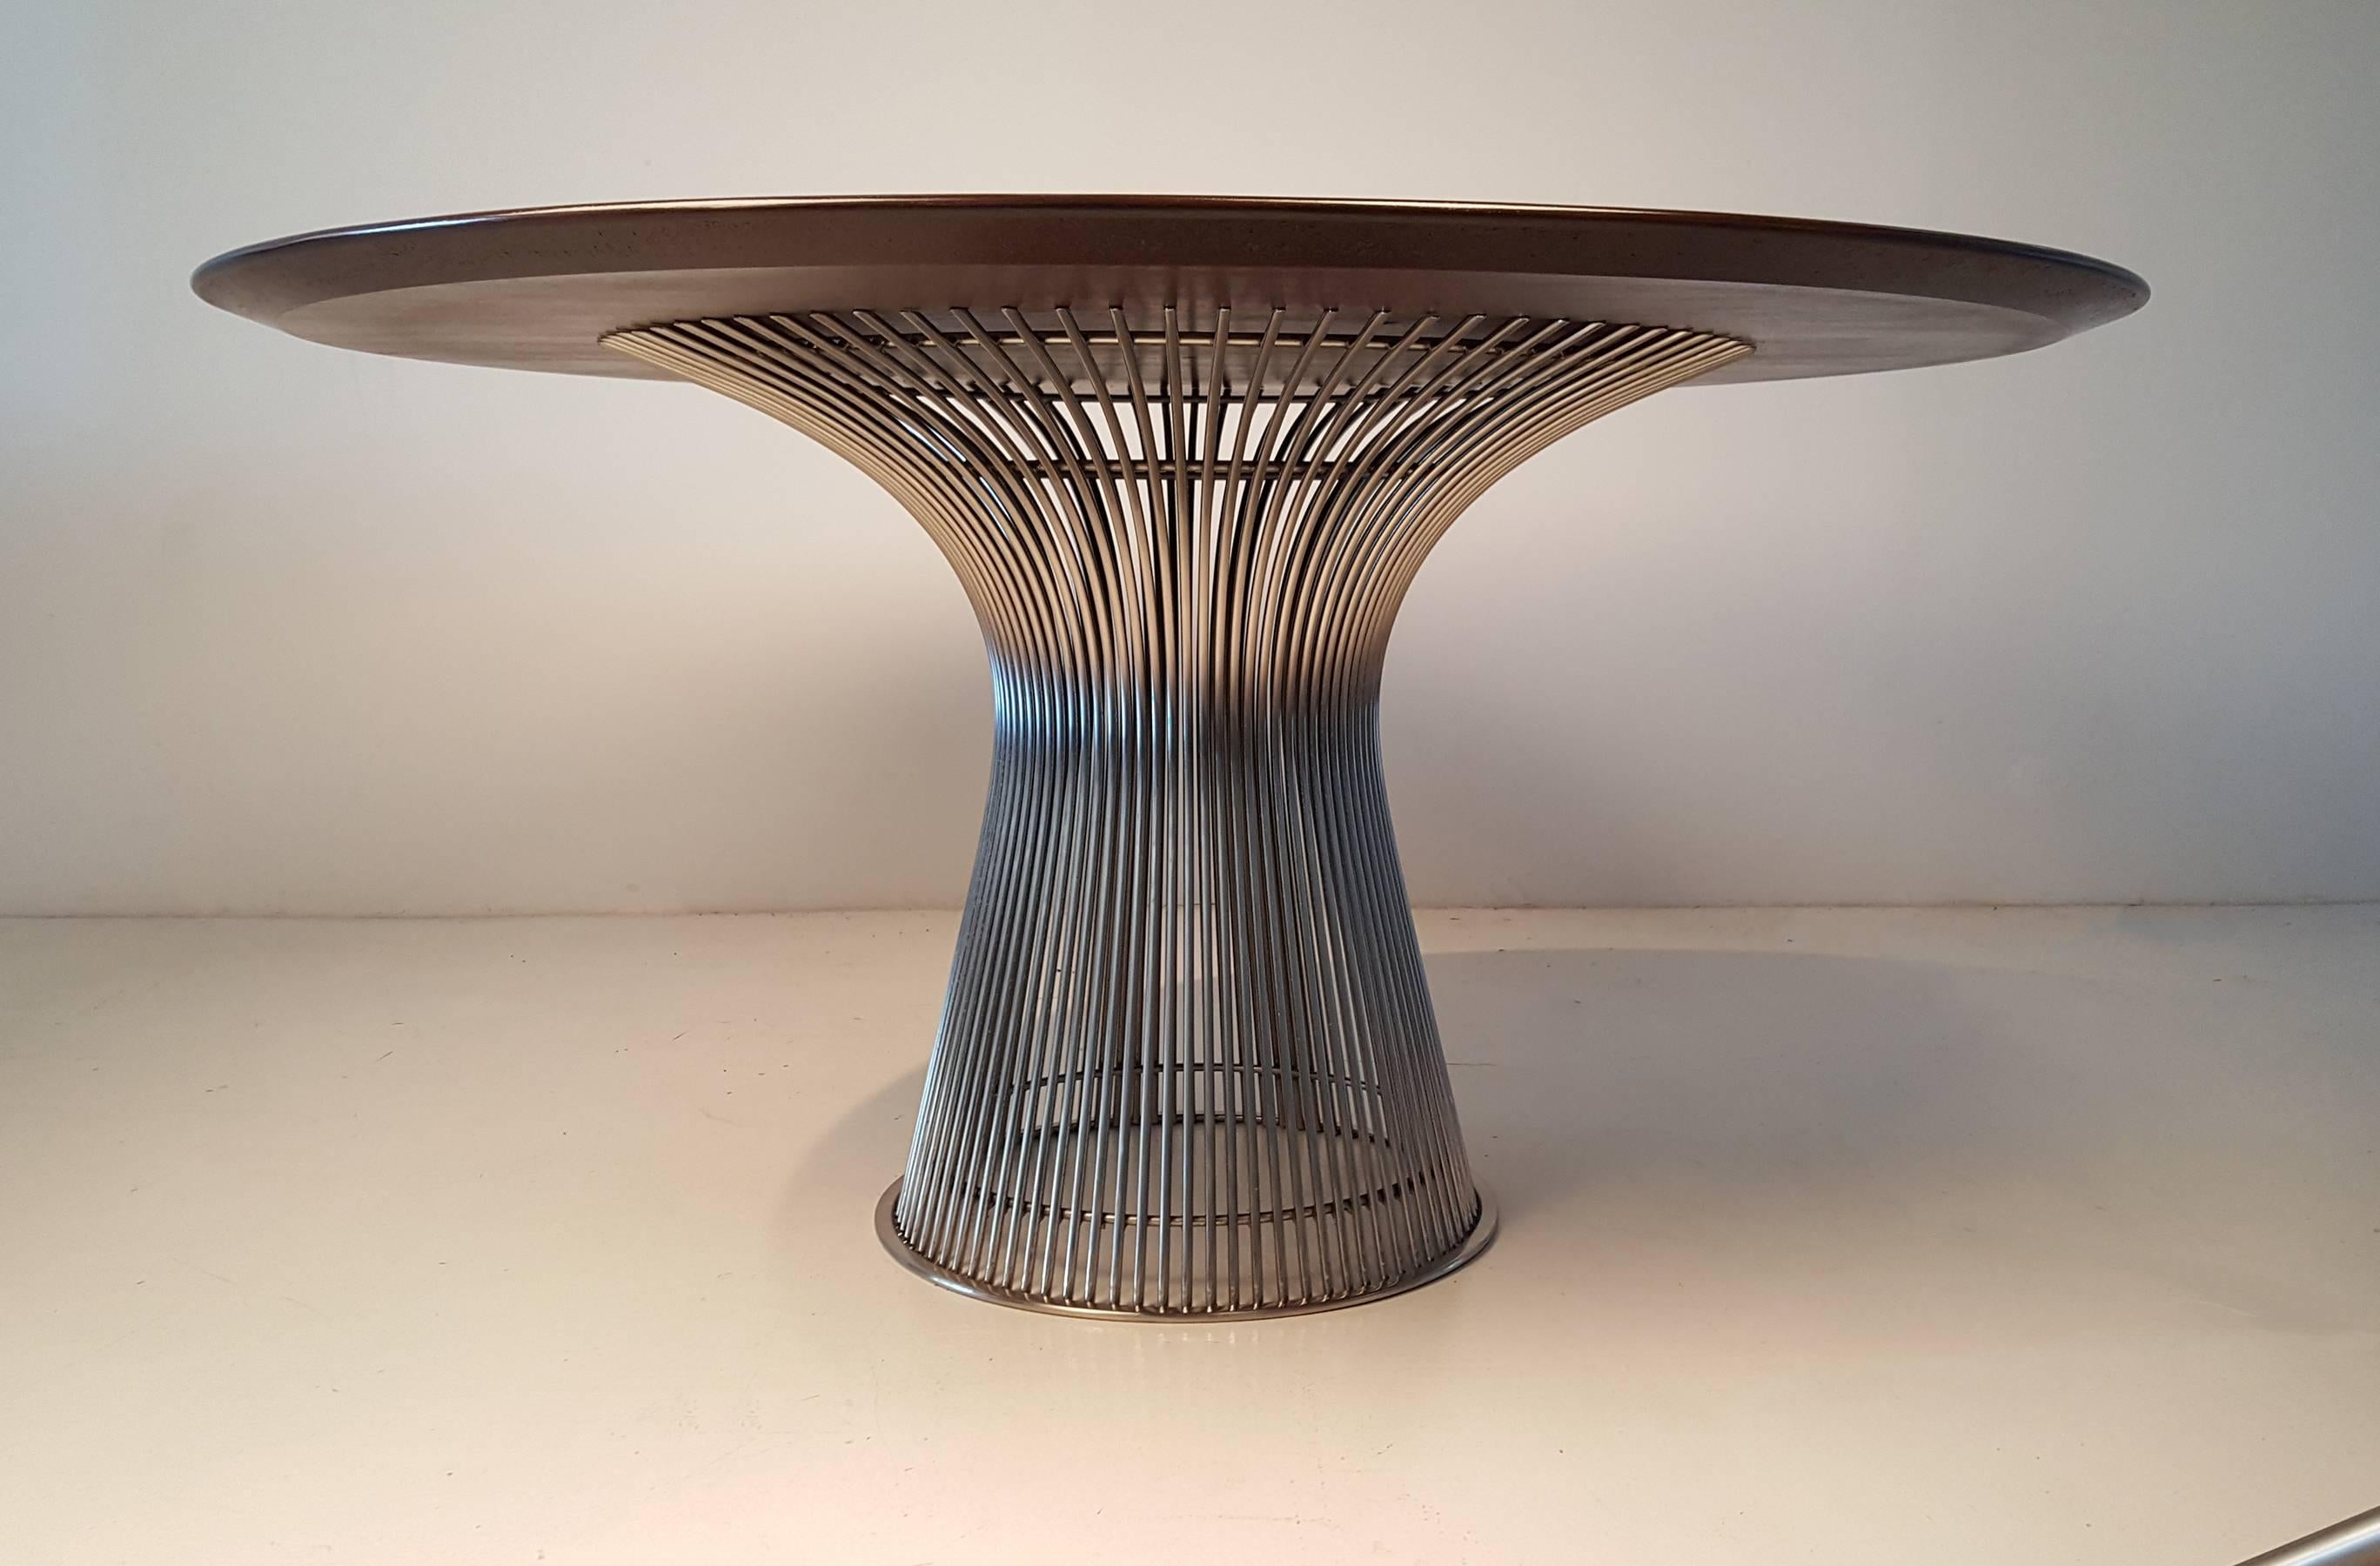 Early Warren Platner for knoll dining table with a dark walnut top and nickel-plated base.